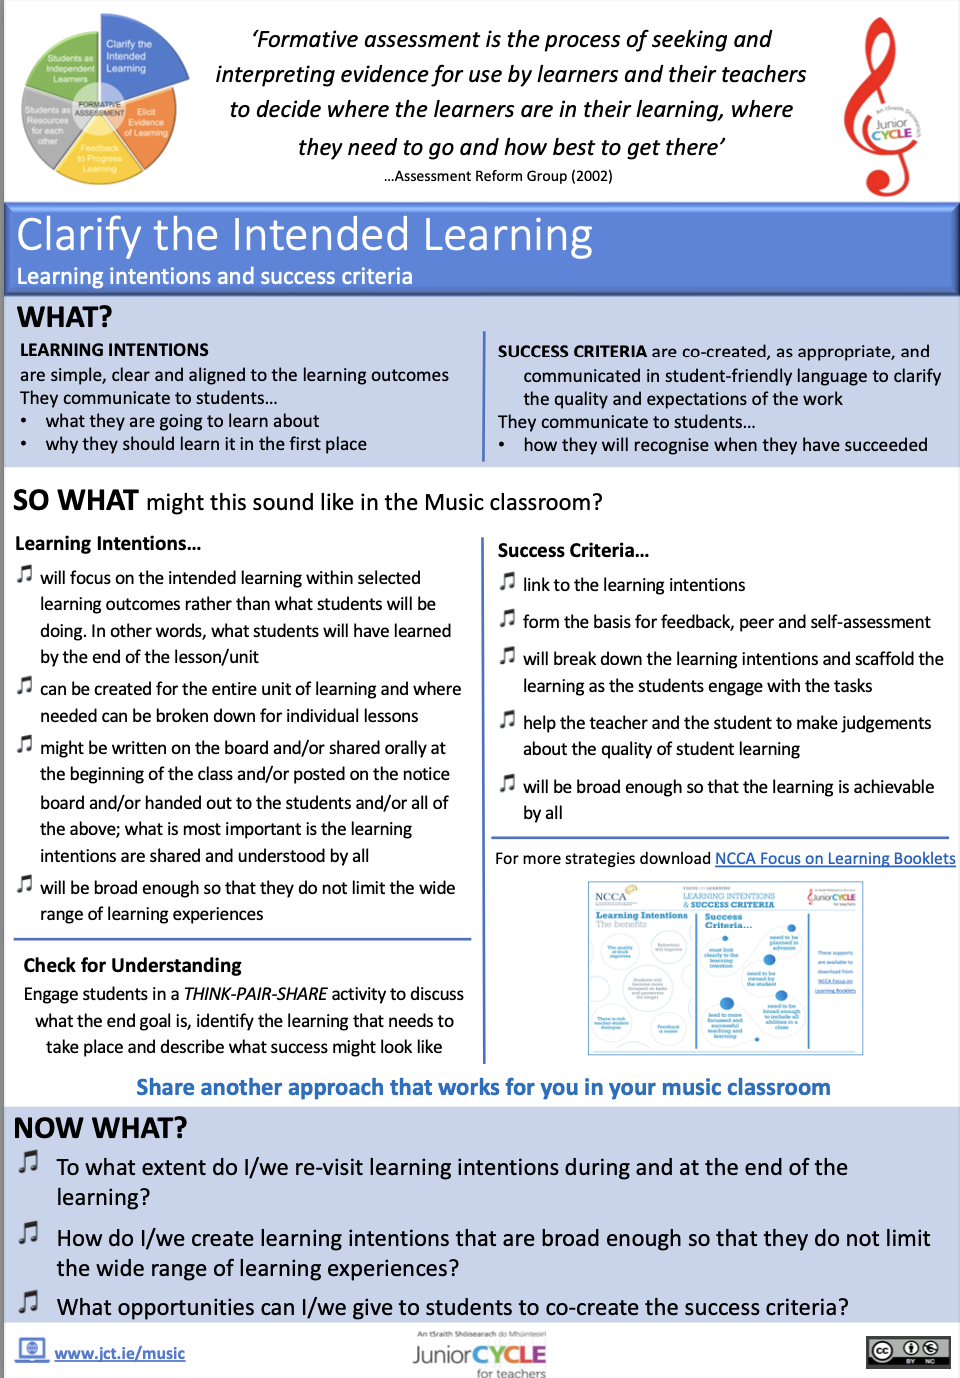 Clarify the Intended Learning